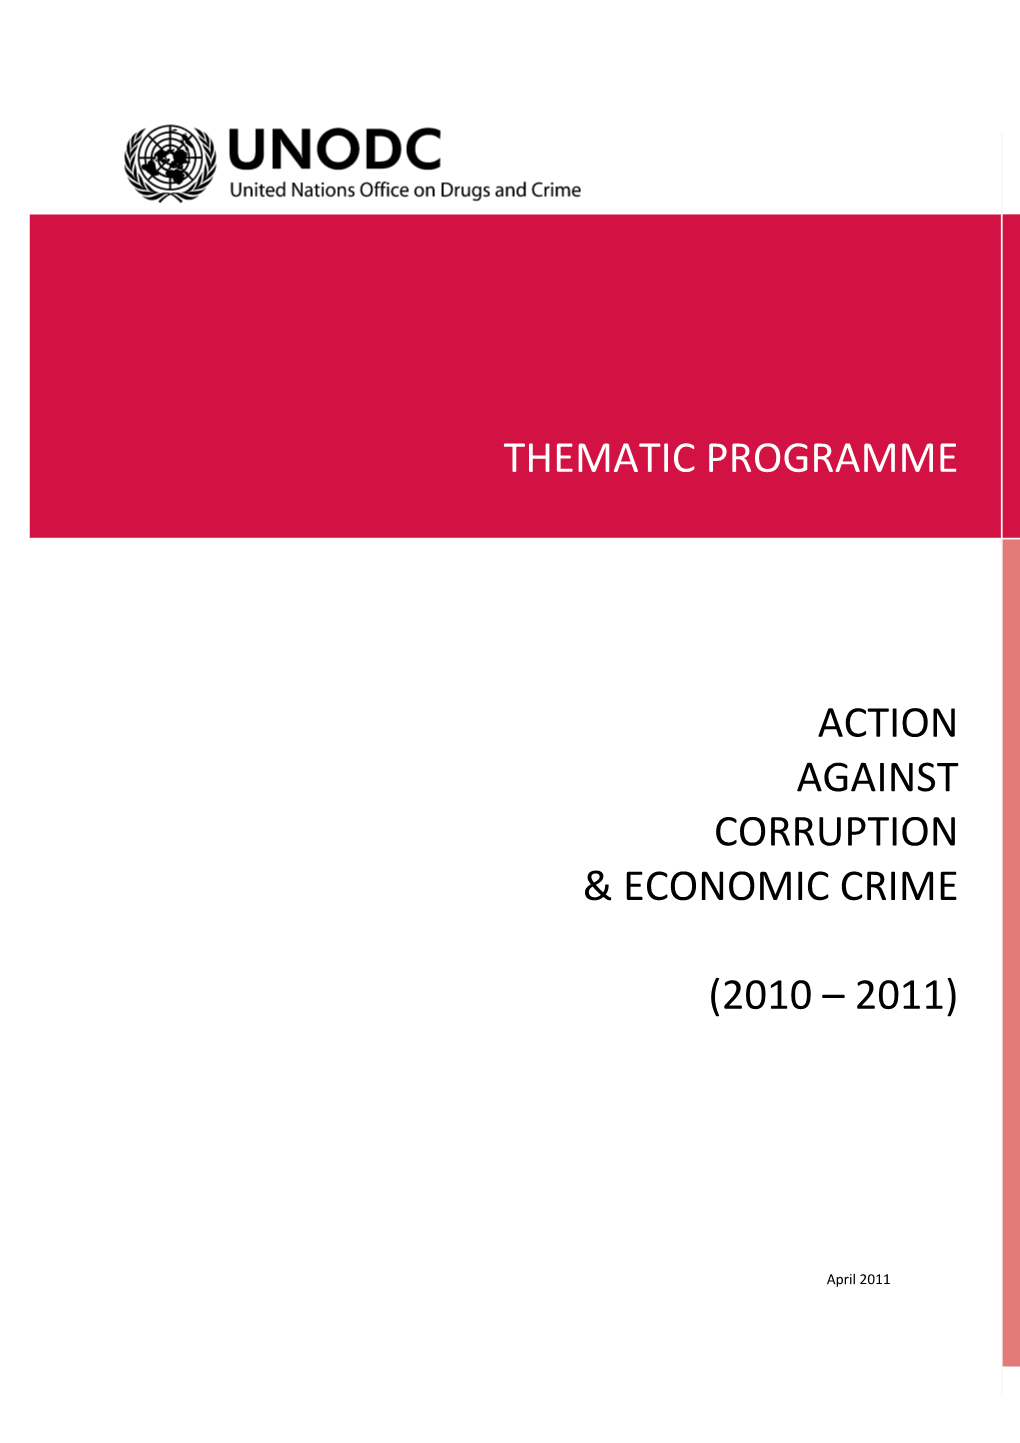 Thematic Programme Action Against Corruption